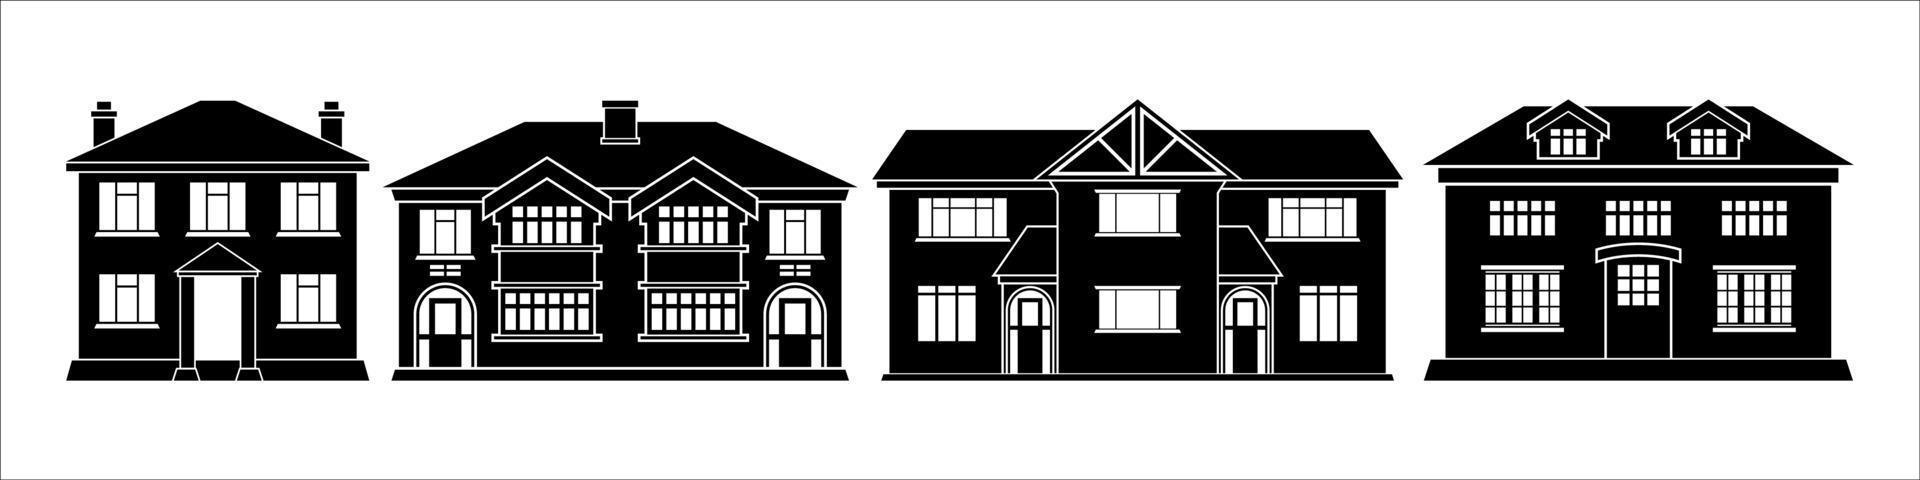 House silhouette, black home vector on white background, for real estate architecture design